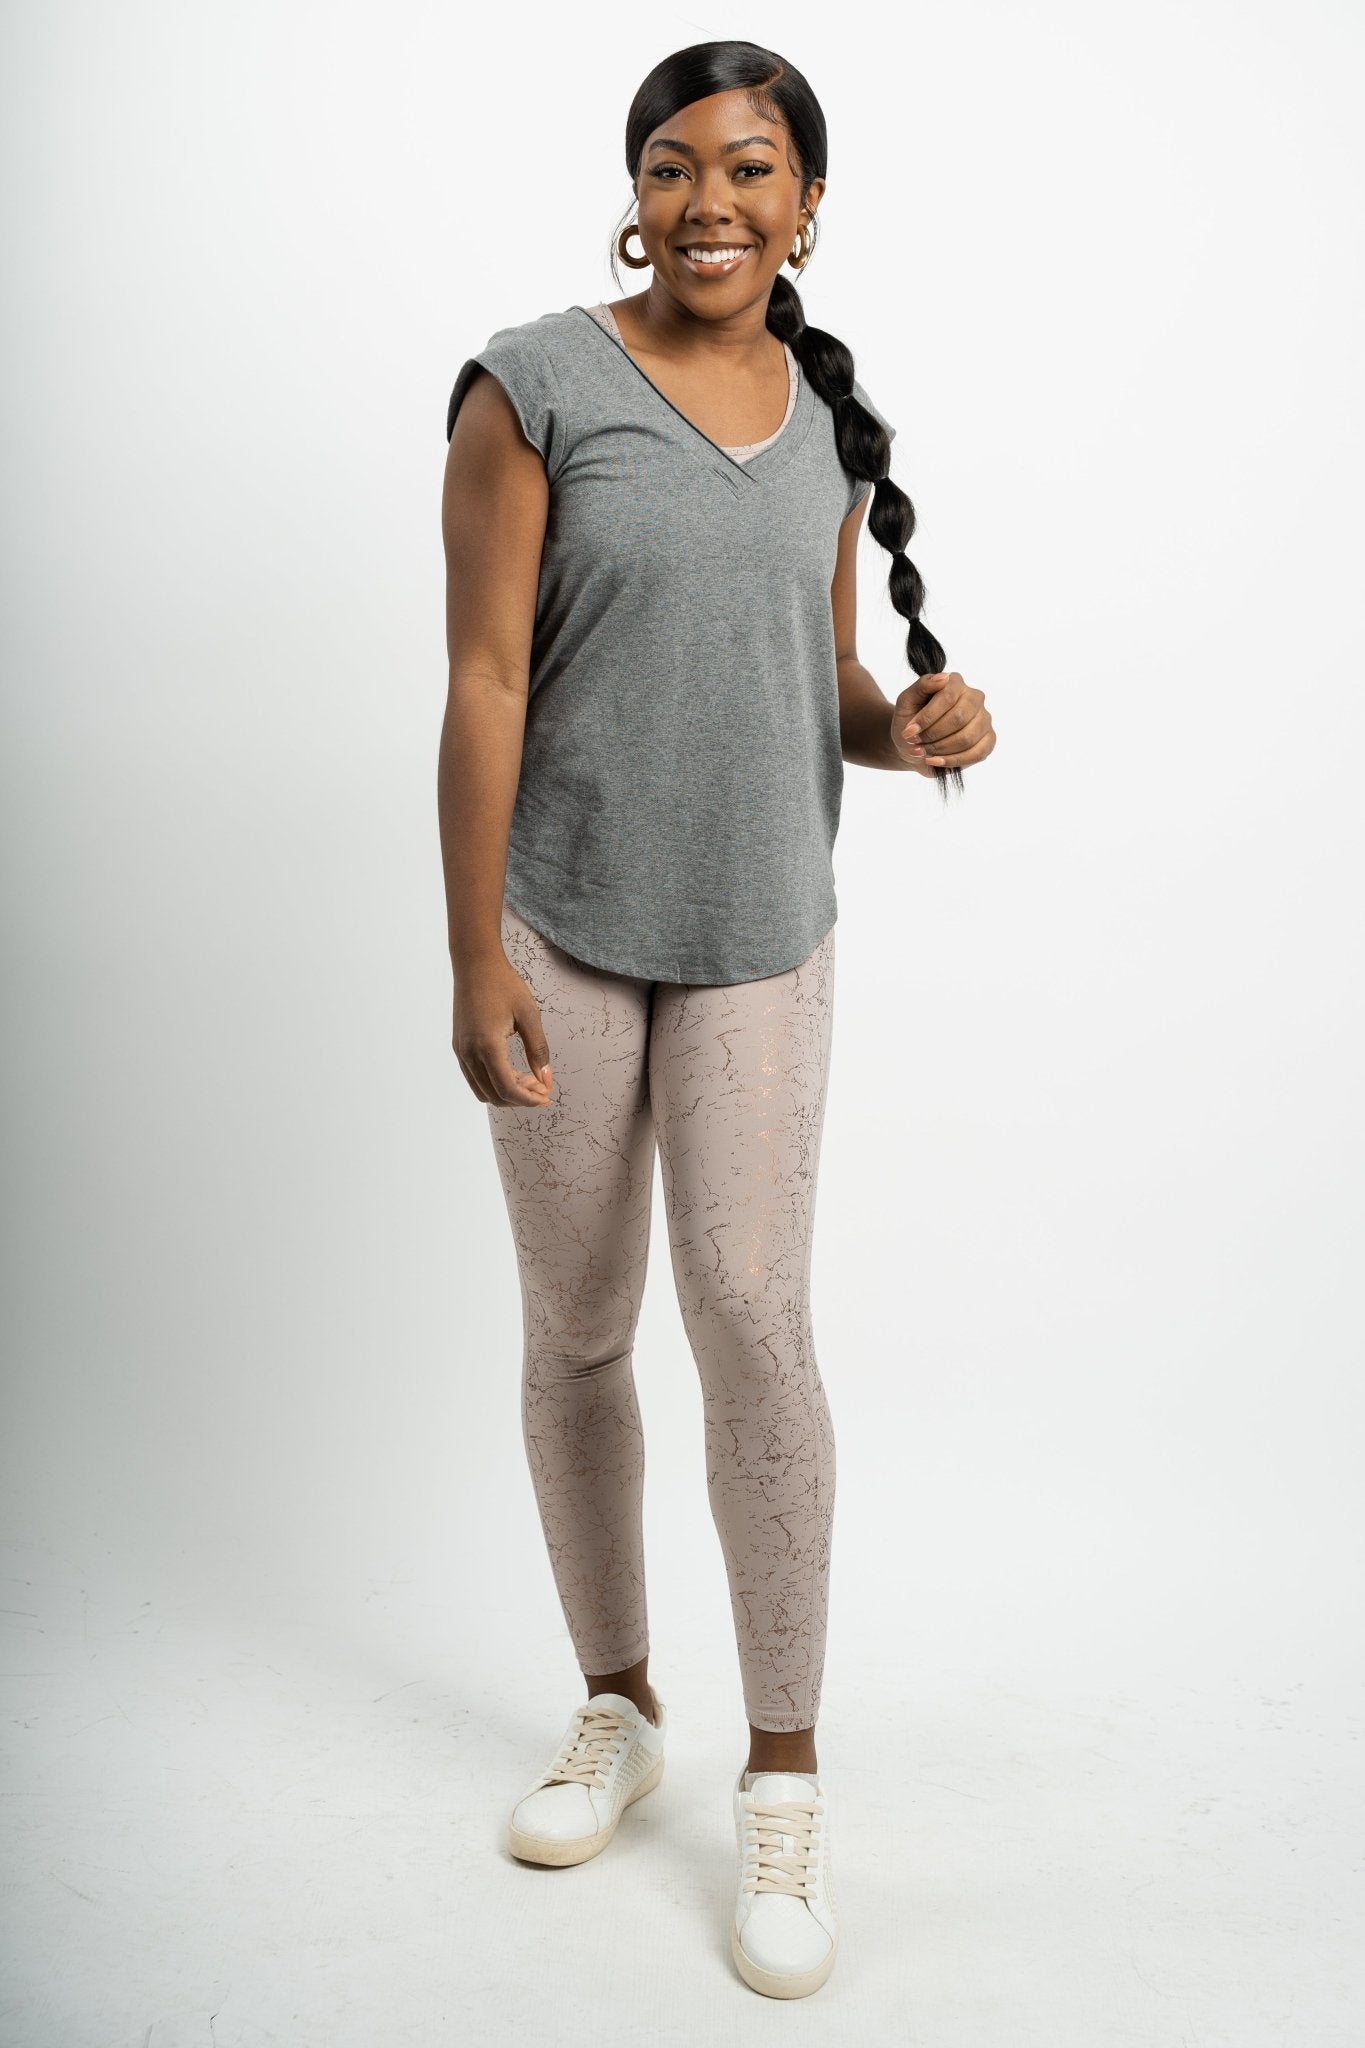 V tee with curved hem heather grey Stylish tops - Trendy Leggings & Sports Bras at Lush Fashion Lounge Boutique in Oklahoma City